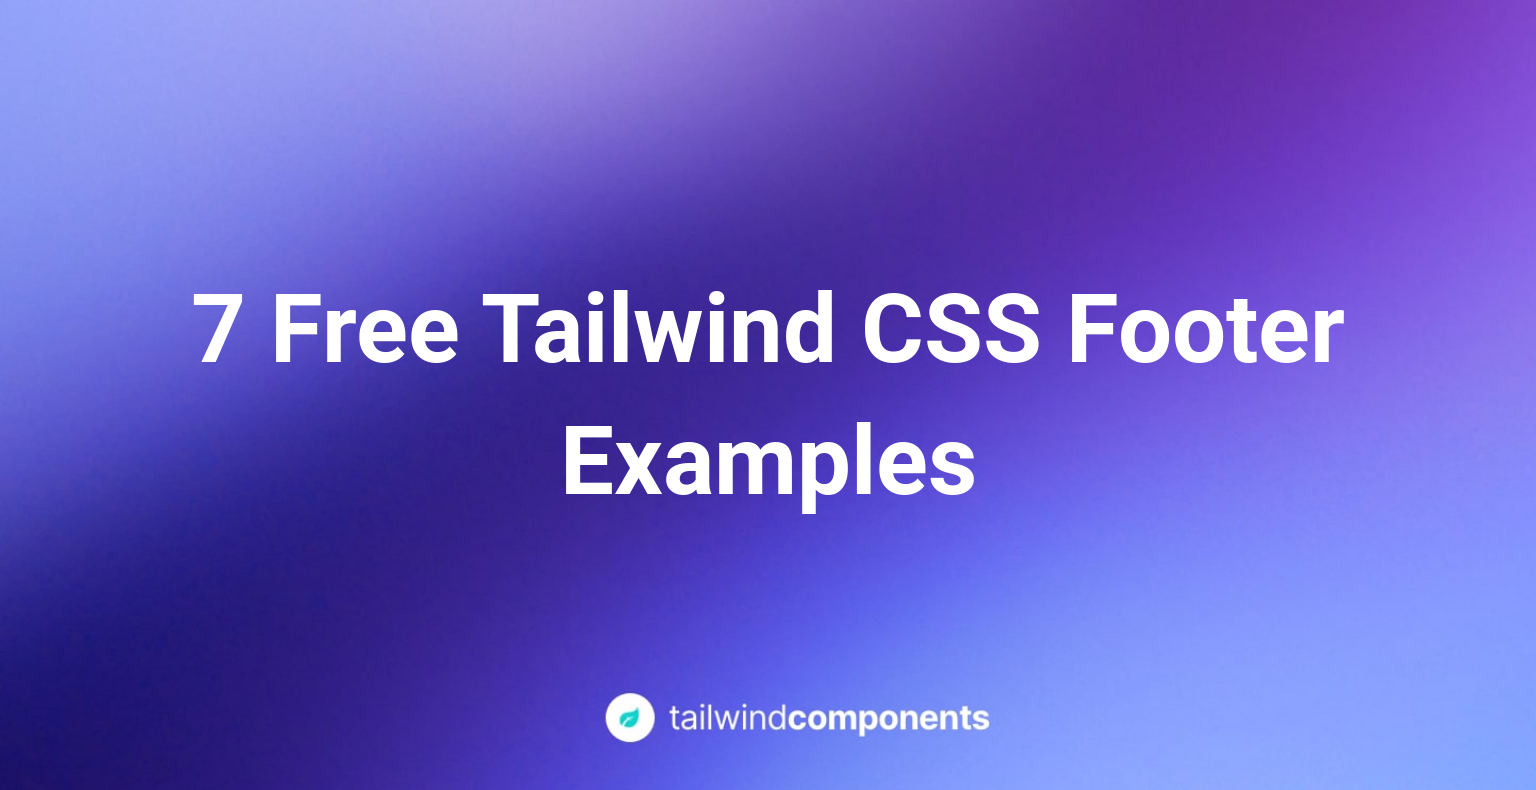 7 Free Tailwind CSS Footer Examples  Image